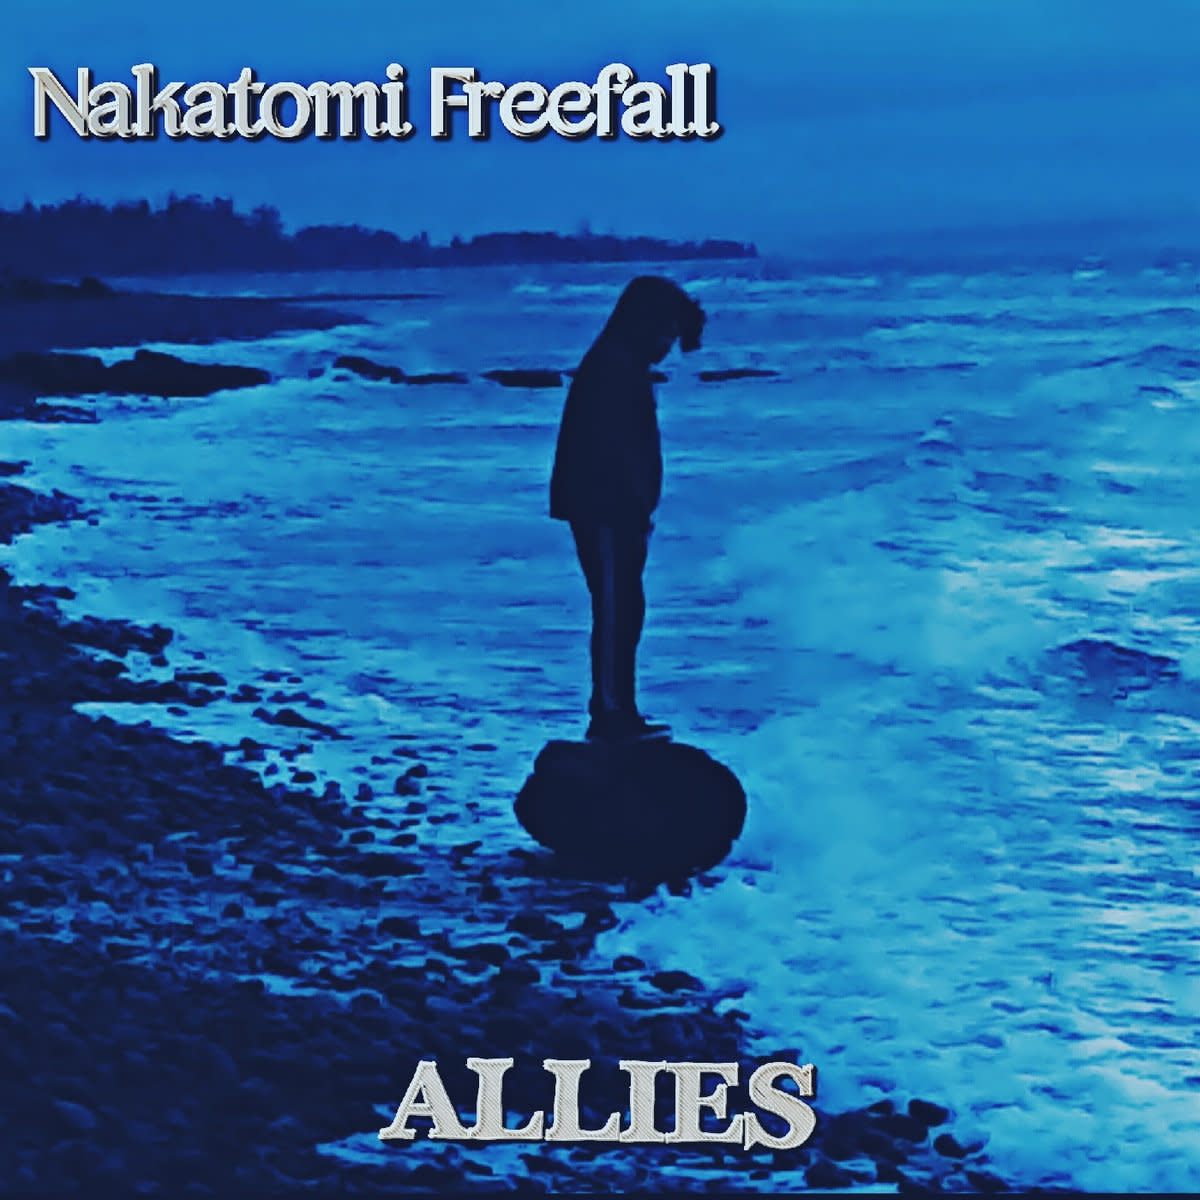 synth-single-review-allies-by-nakatomi-freefall